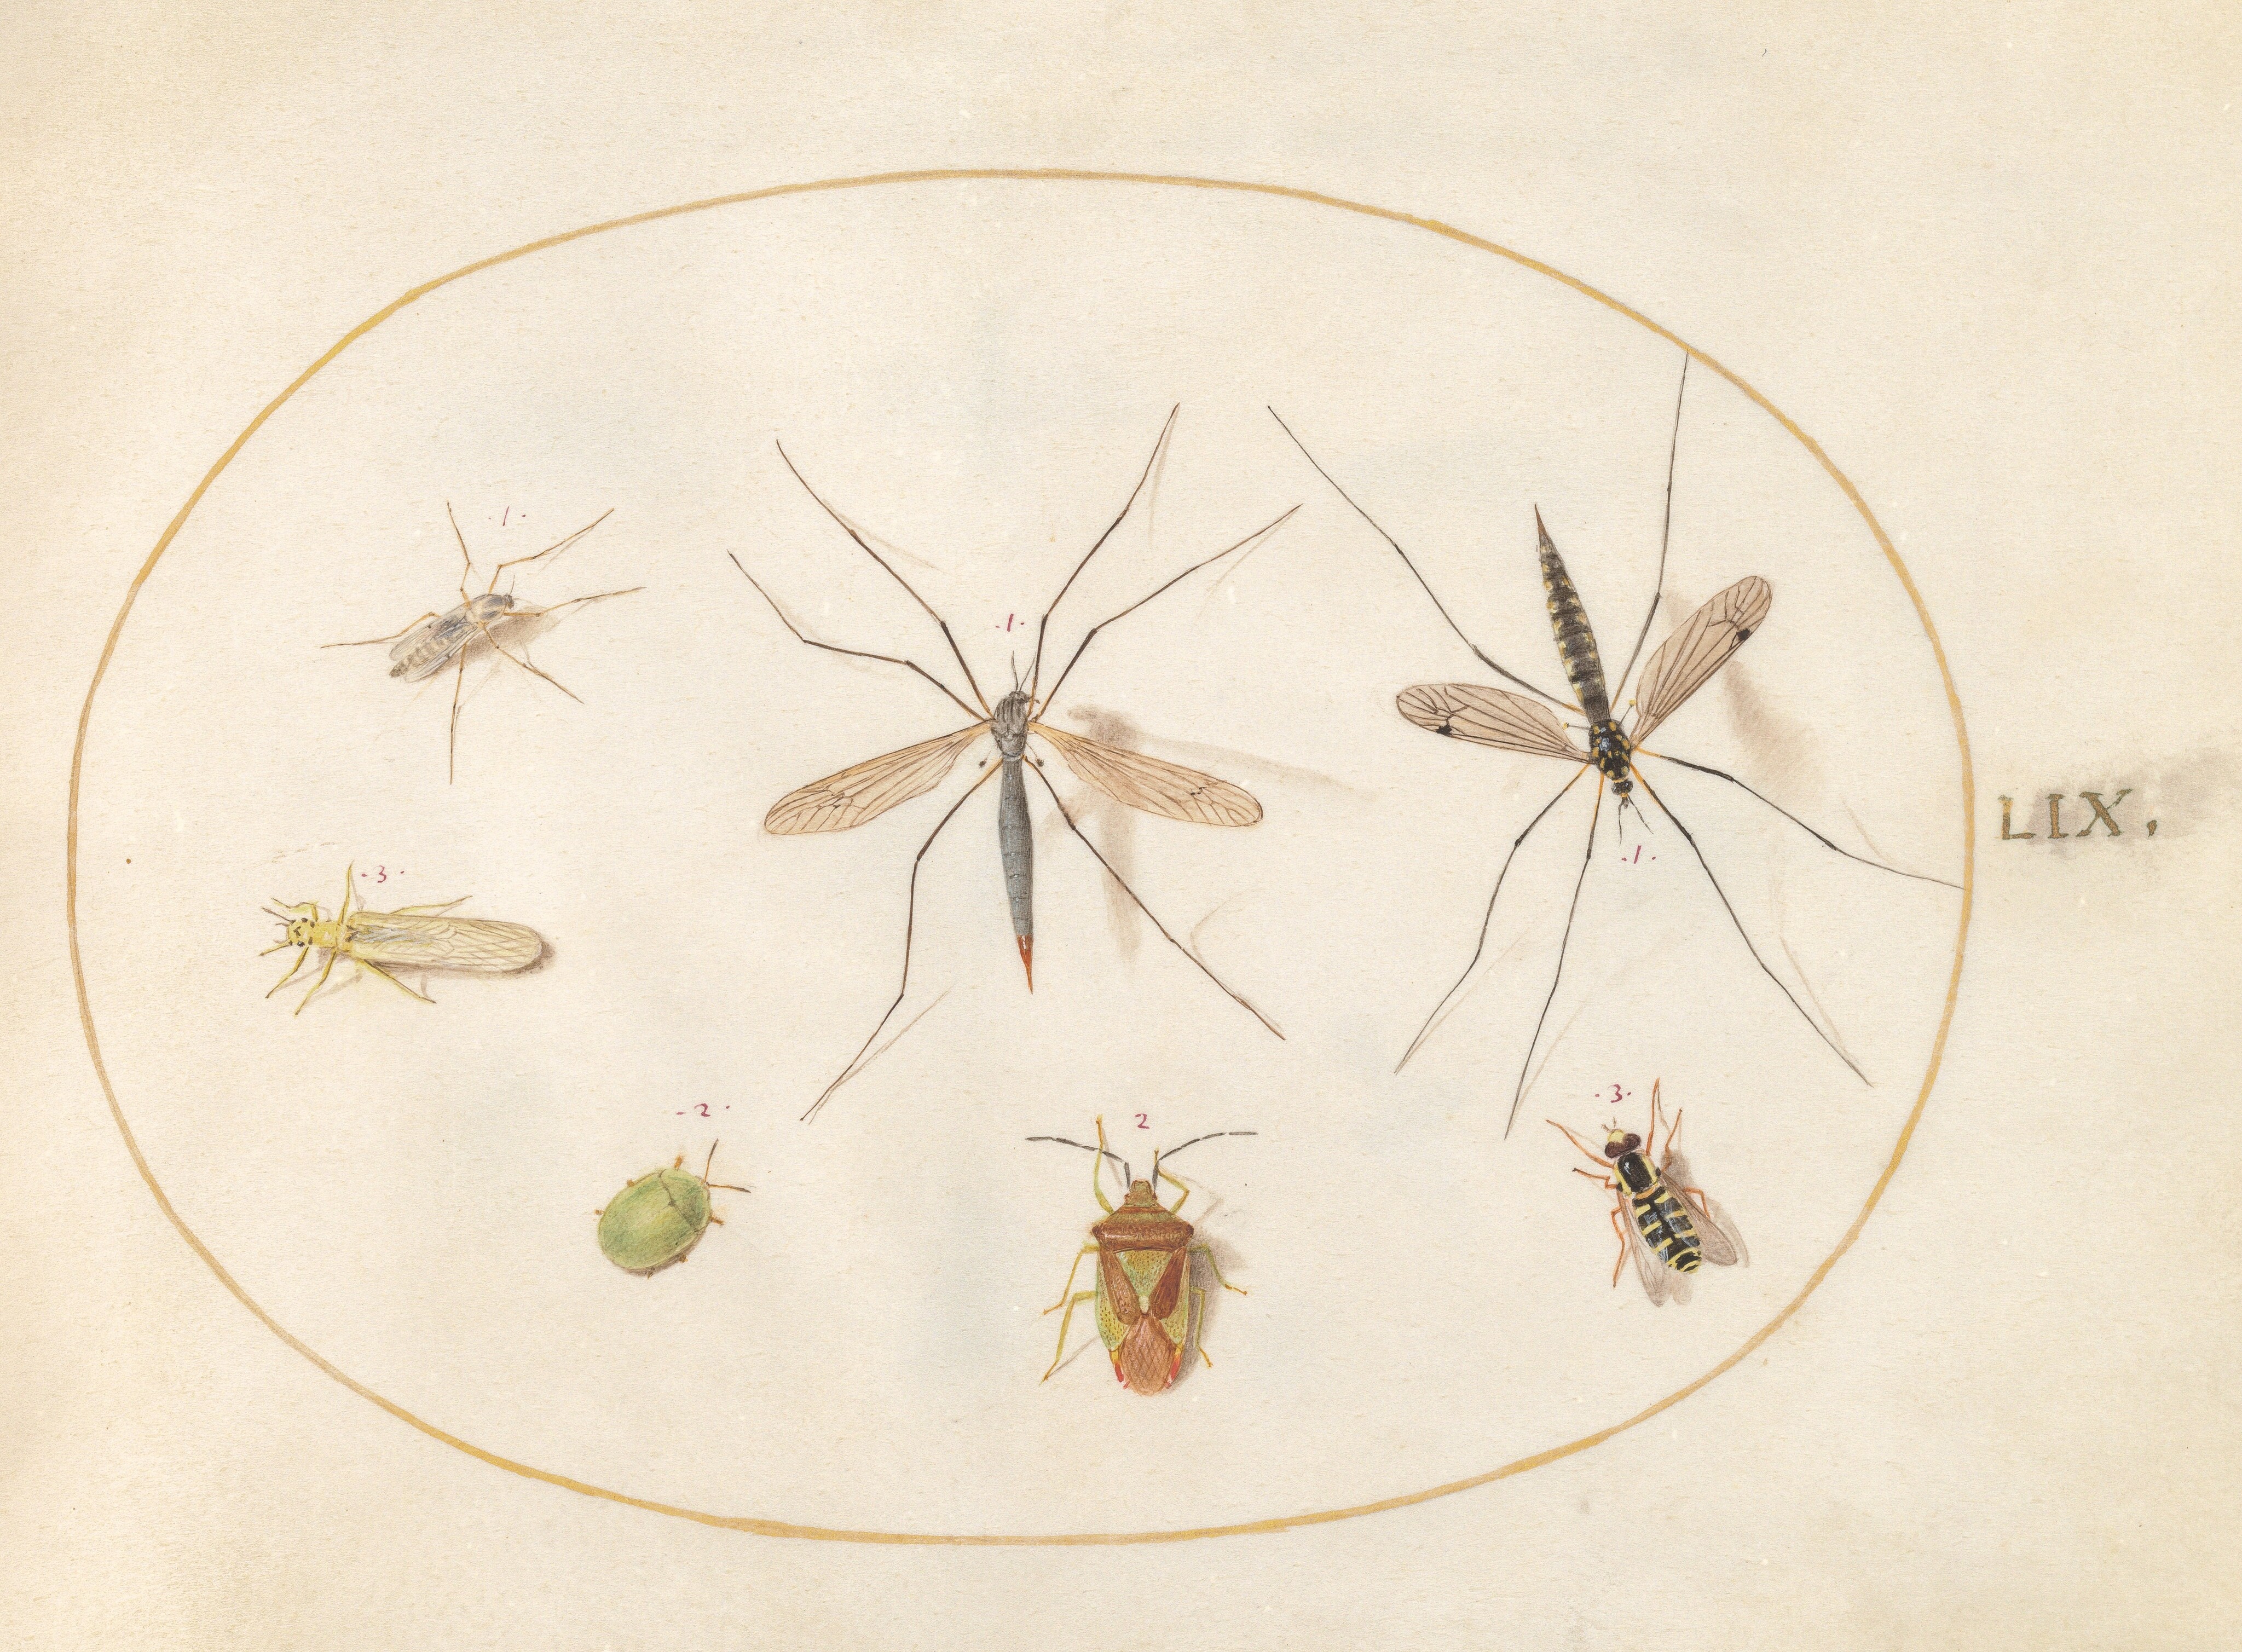 Watercolor drawing of several insects spaciously arranged for display